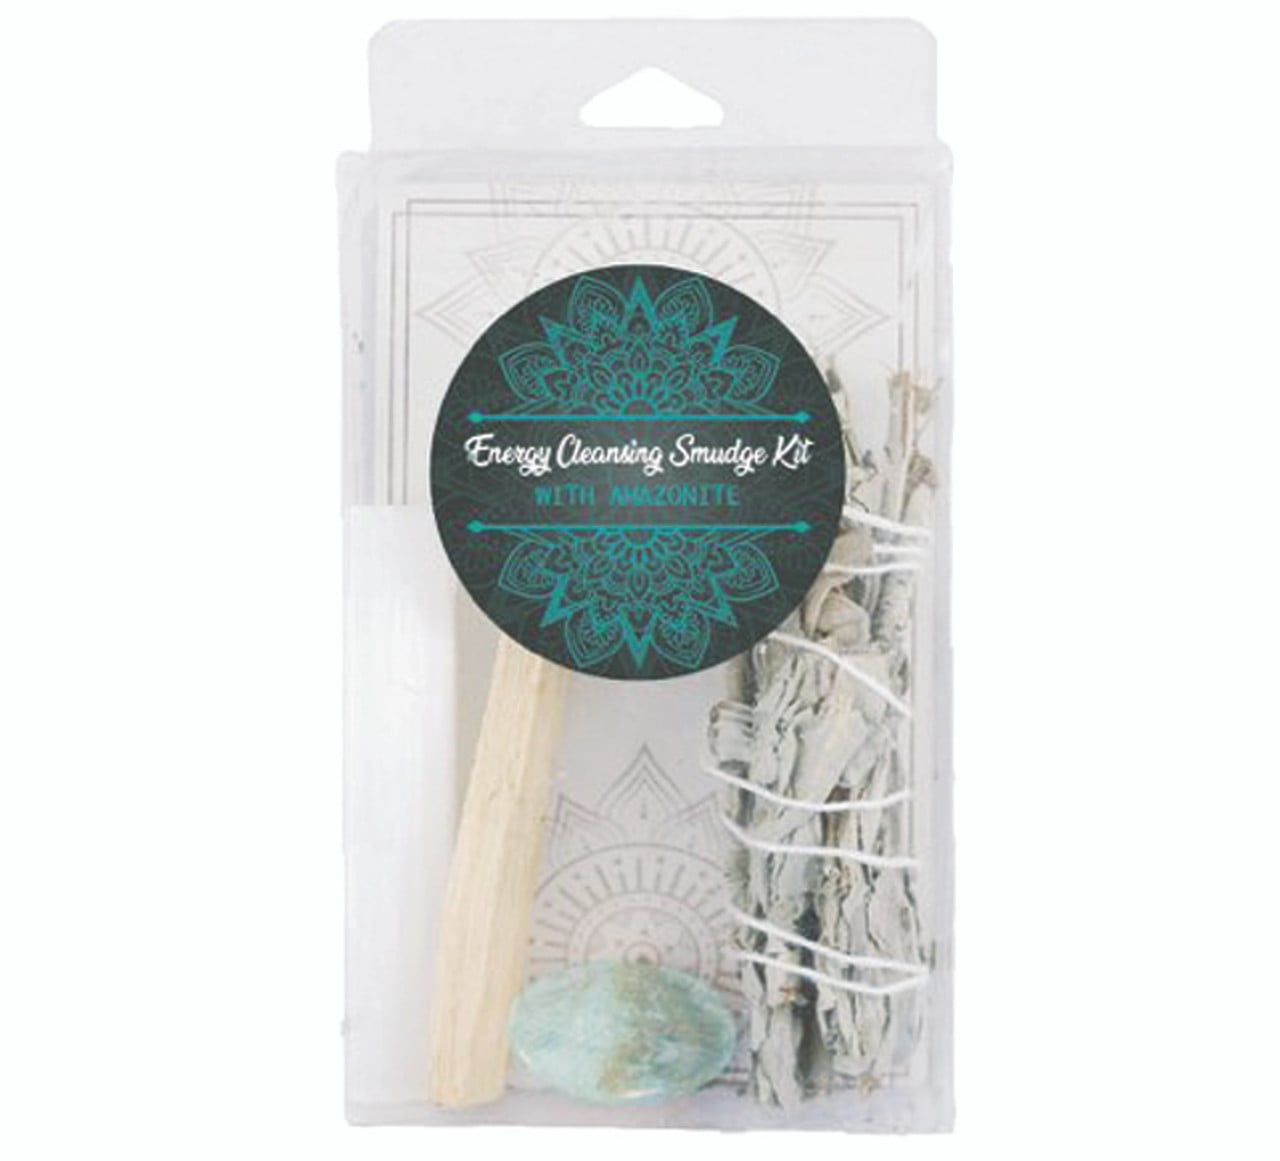 Energy Cleansing Smudge Kit with Amazonite